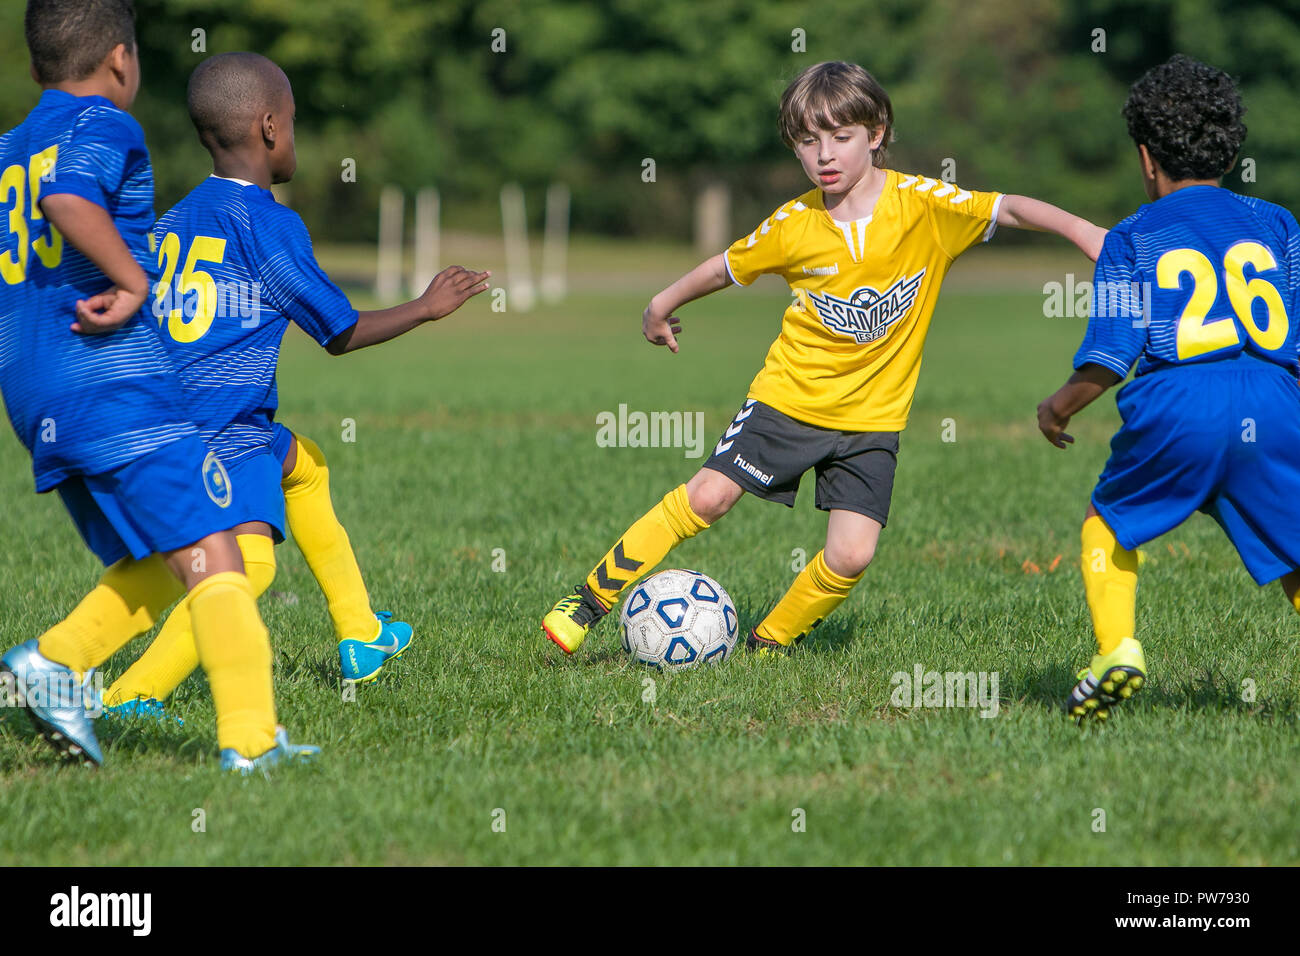 New York , September 29, 2018: 7 and 8 year old boys are playing a league soccer game. Stock Photo